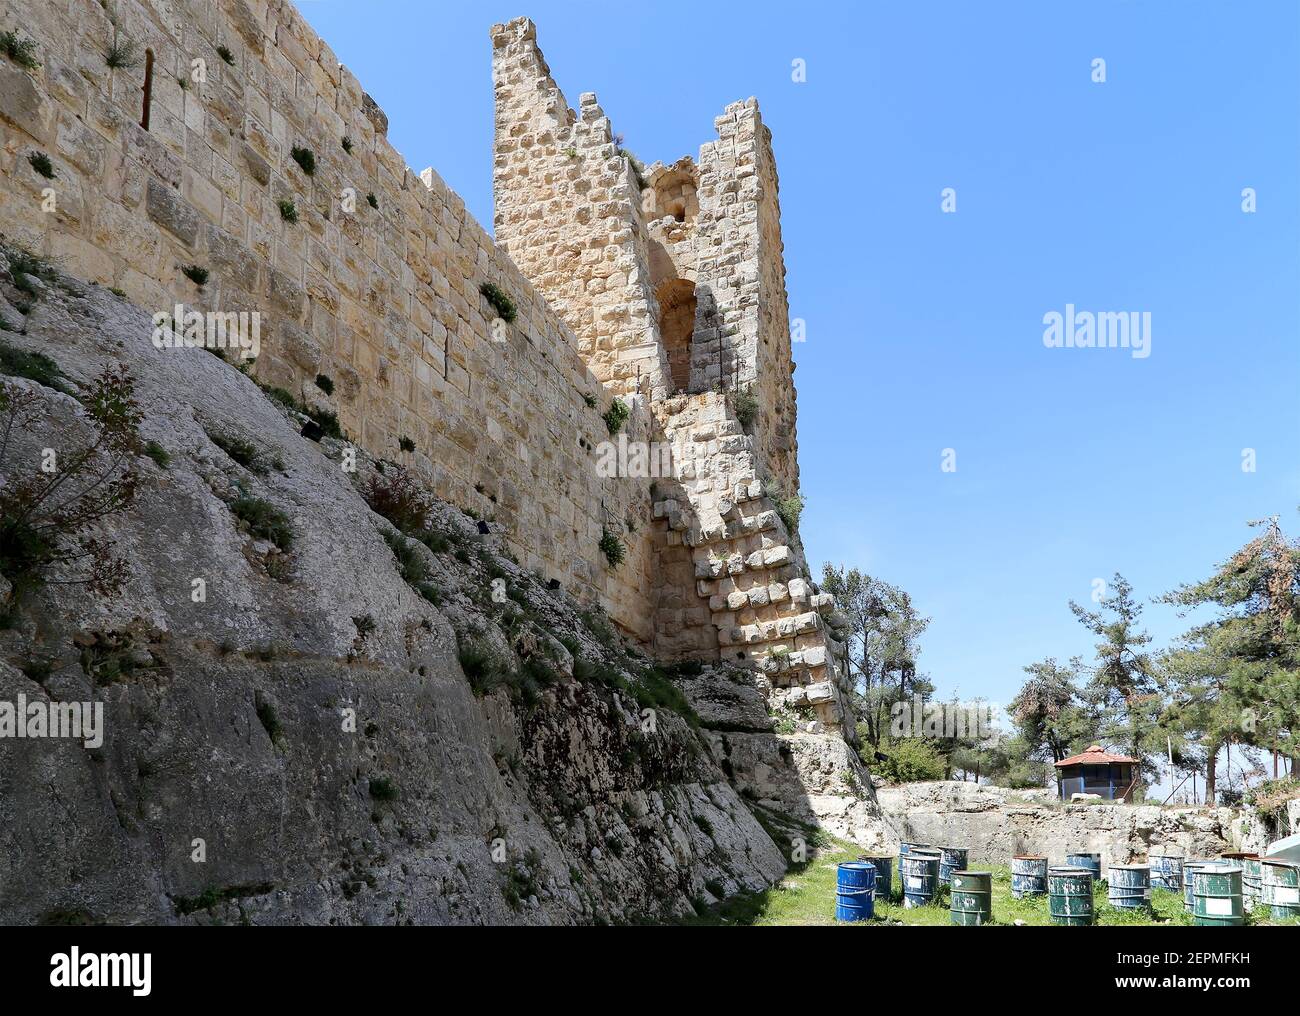 The ayyubid castle of Ajloun in northern Jordan, built in the 12th century, Middle East Stock Photo